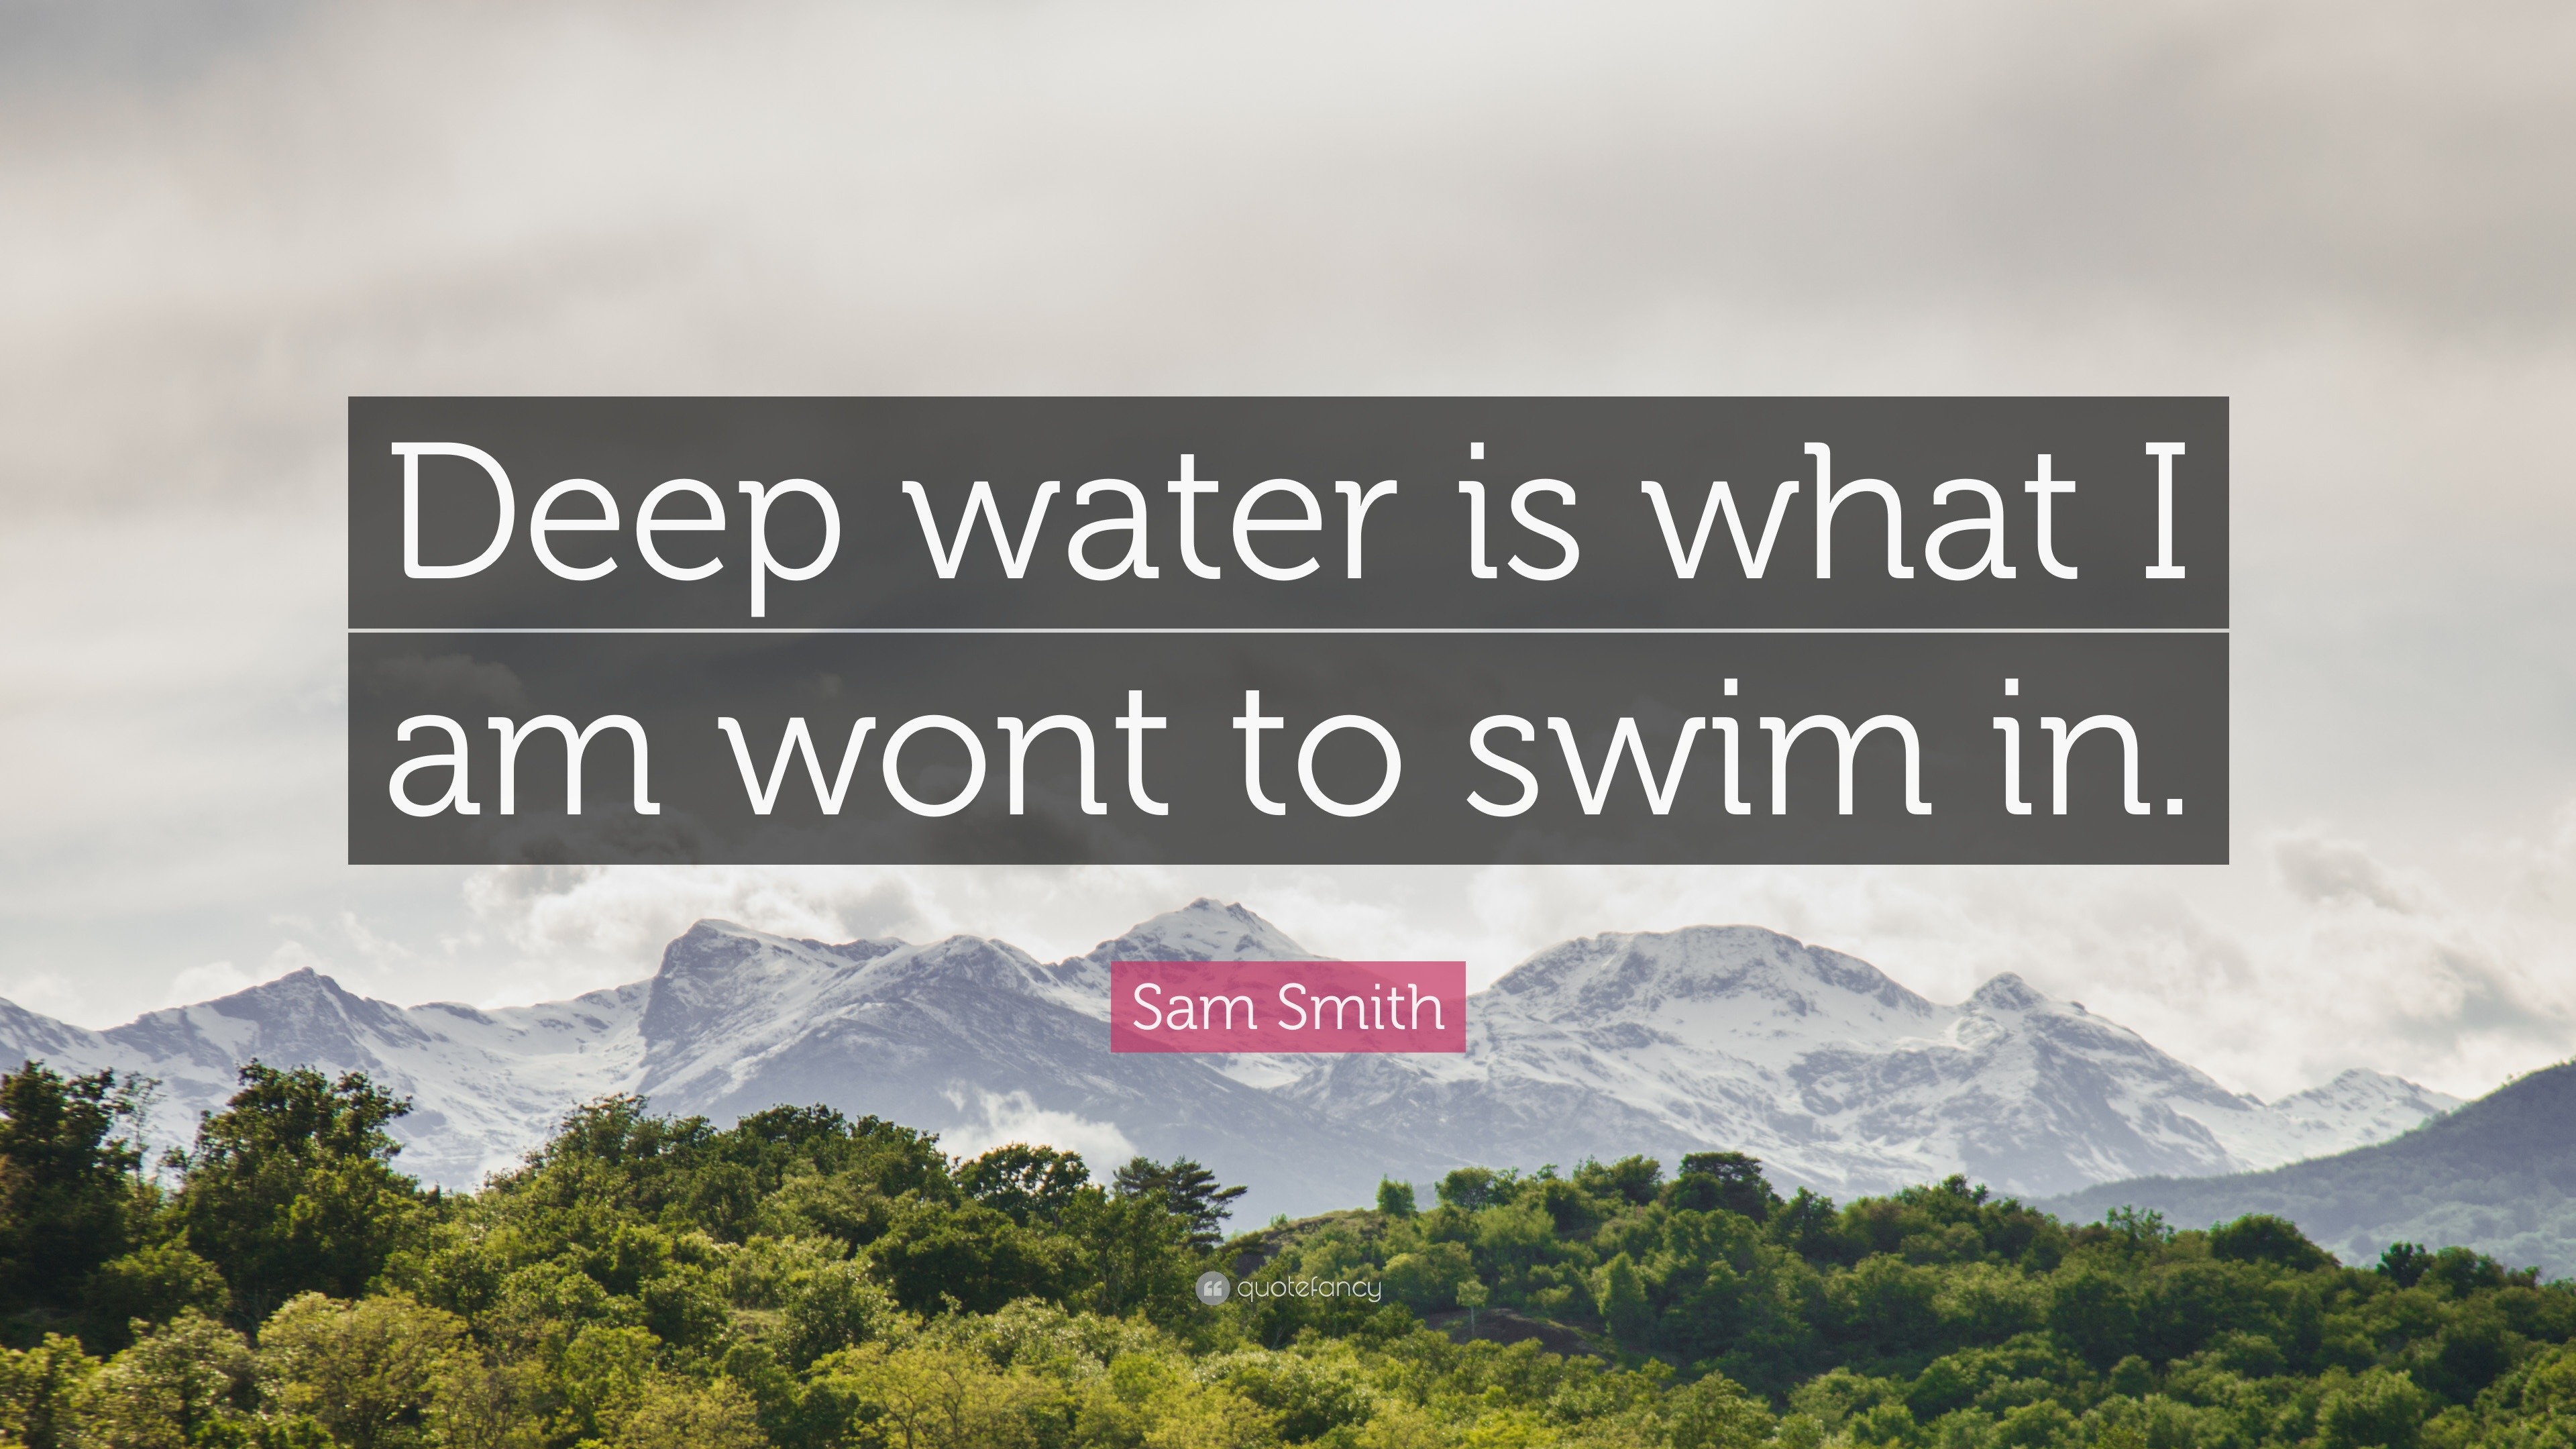 Sam Smith Quote: “Deep water is what I am wont to swim in.”